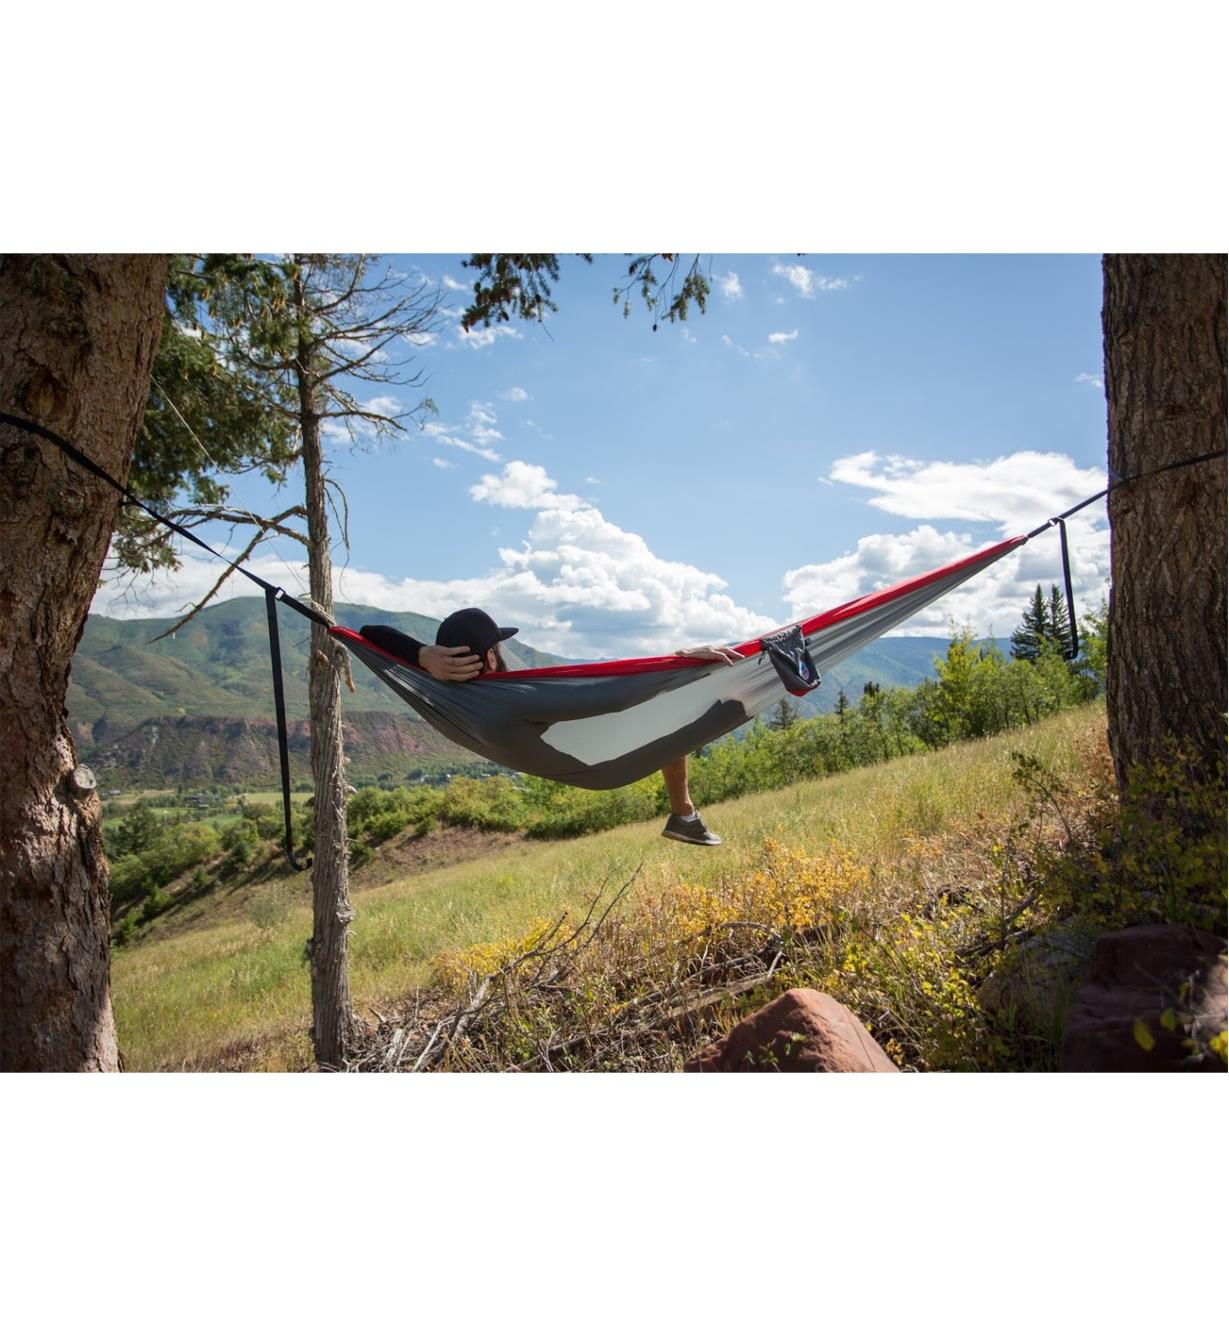 A person lying in a gray/red hammock hammock hung between two trees by a meadow